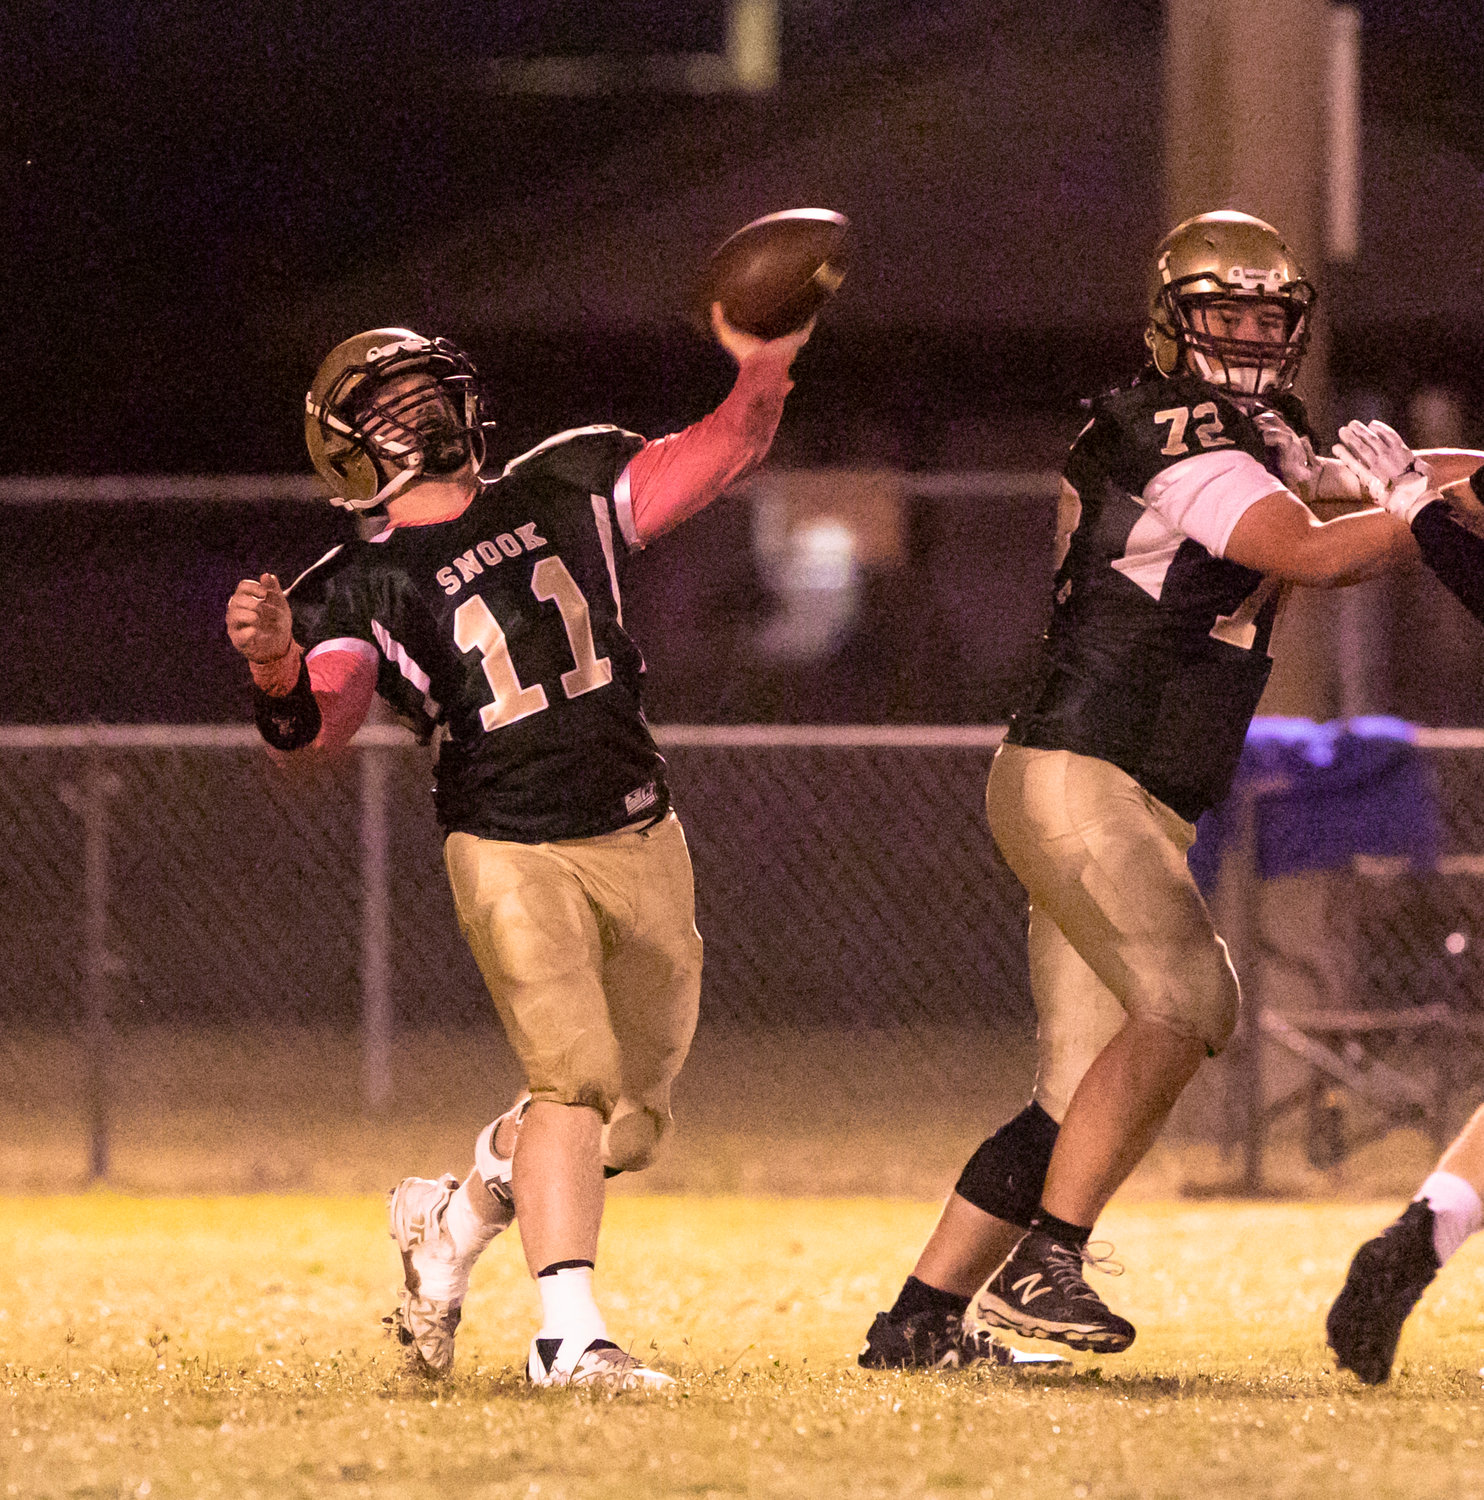 Eagle senior Philip Butts launches a throw downfield during Snook Christian Academy’s home game against the Crenshaw Cougars at Summerdale Junior High Friday night. Butts was recently announced as the school’s first AISA All-Star representative.